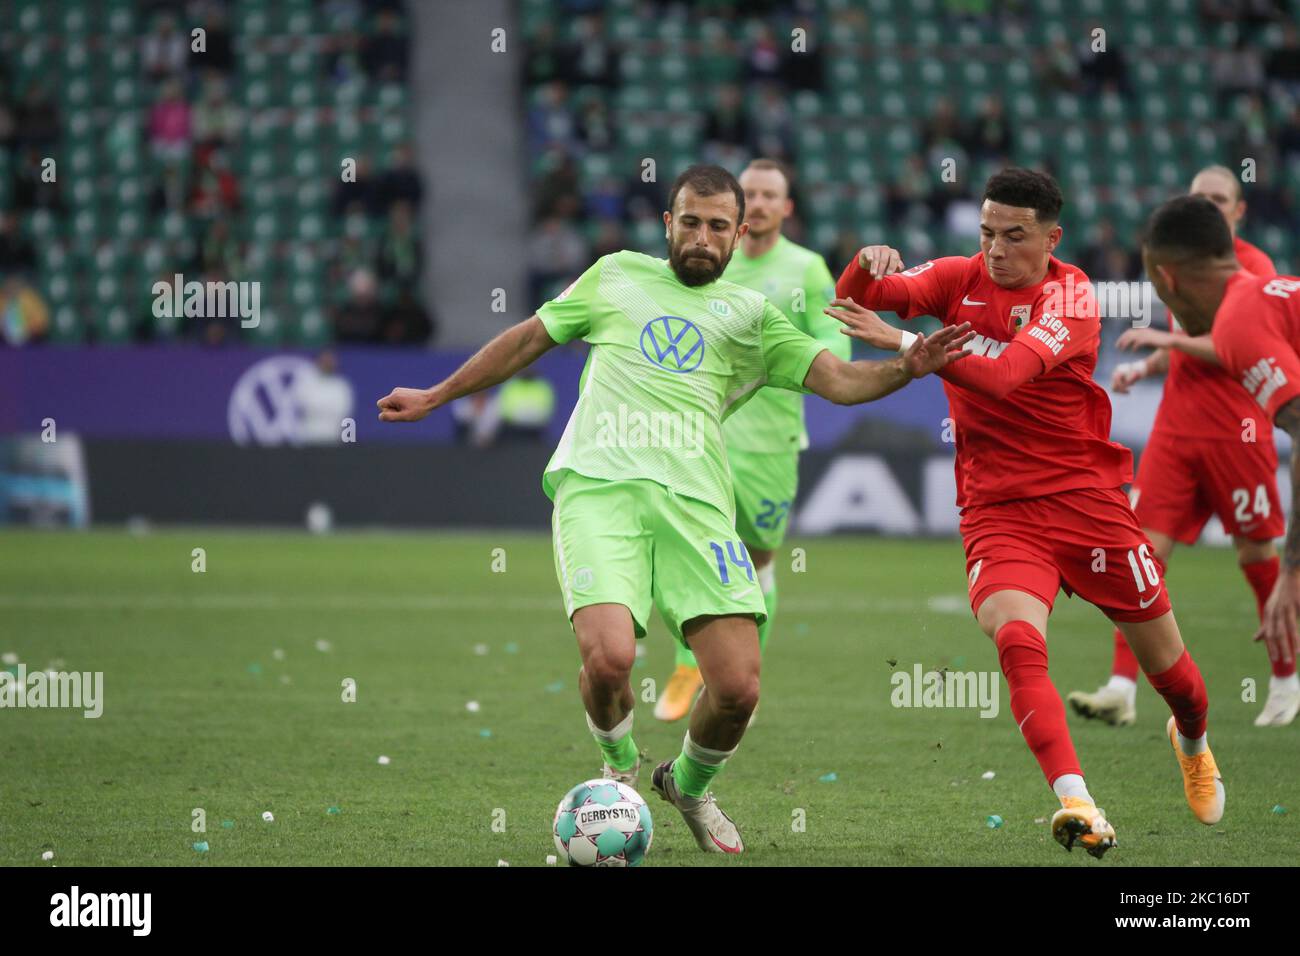 Admir Mehmedi of VfL Wolfsburg and Ruben Vargas of FC Augsburg battle for the ball during the Bundesliga match between VfL Wolfsburg and FC Augsburg at Volkswagen Arena on October 04, 2020 in Wolfsburg, Germany. (Photo by Peter Niedung/NurPhoto) Stock Photo